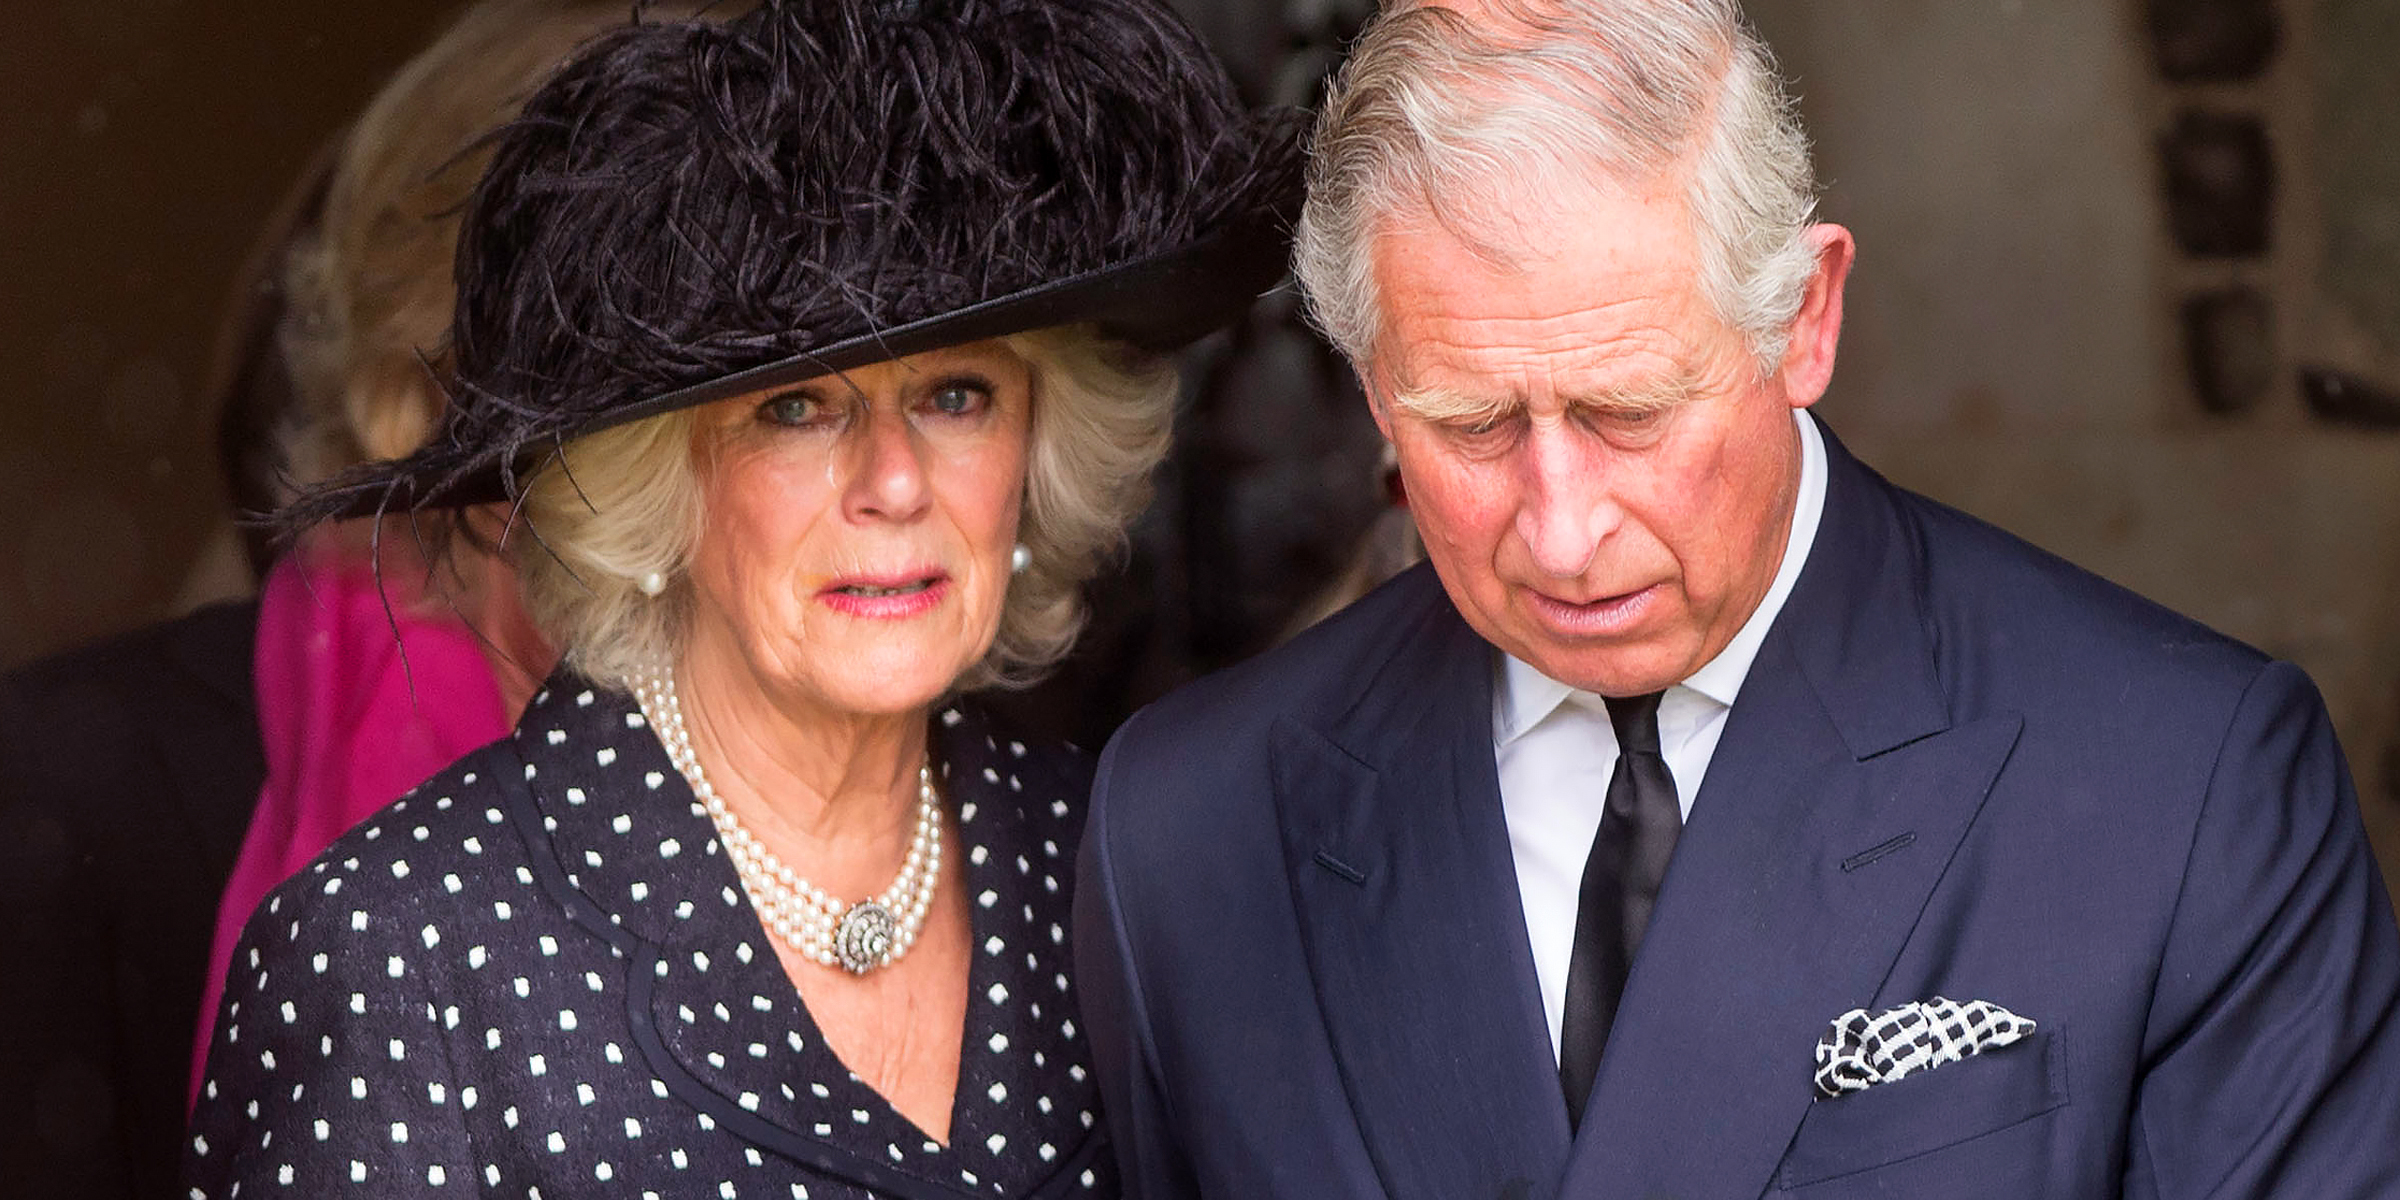 King Charles III and Queen Camilla | Source: Getty Images